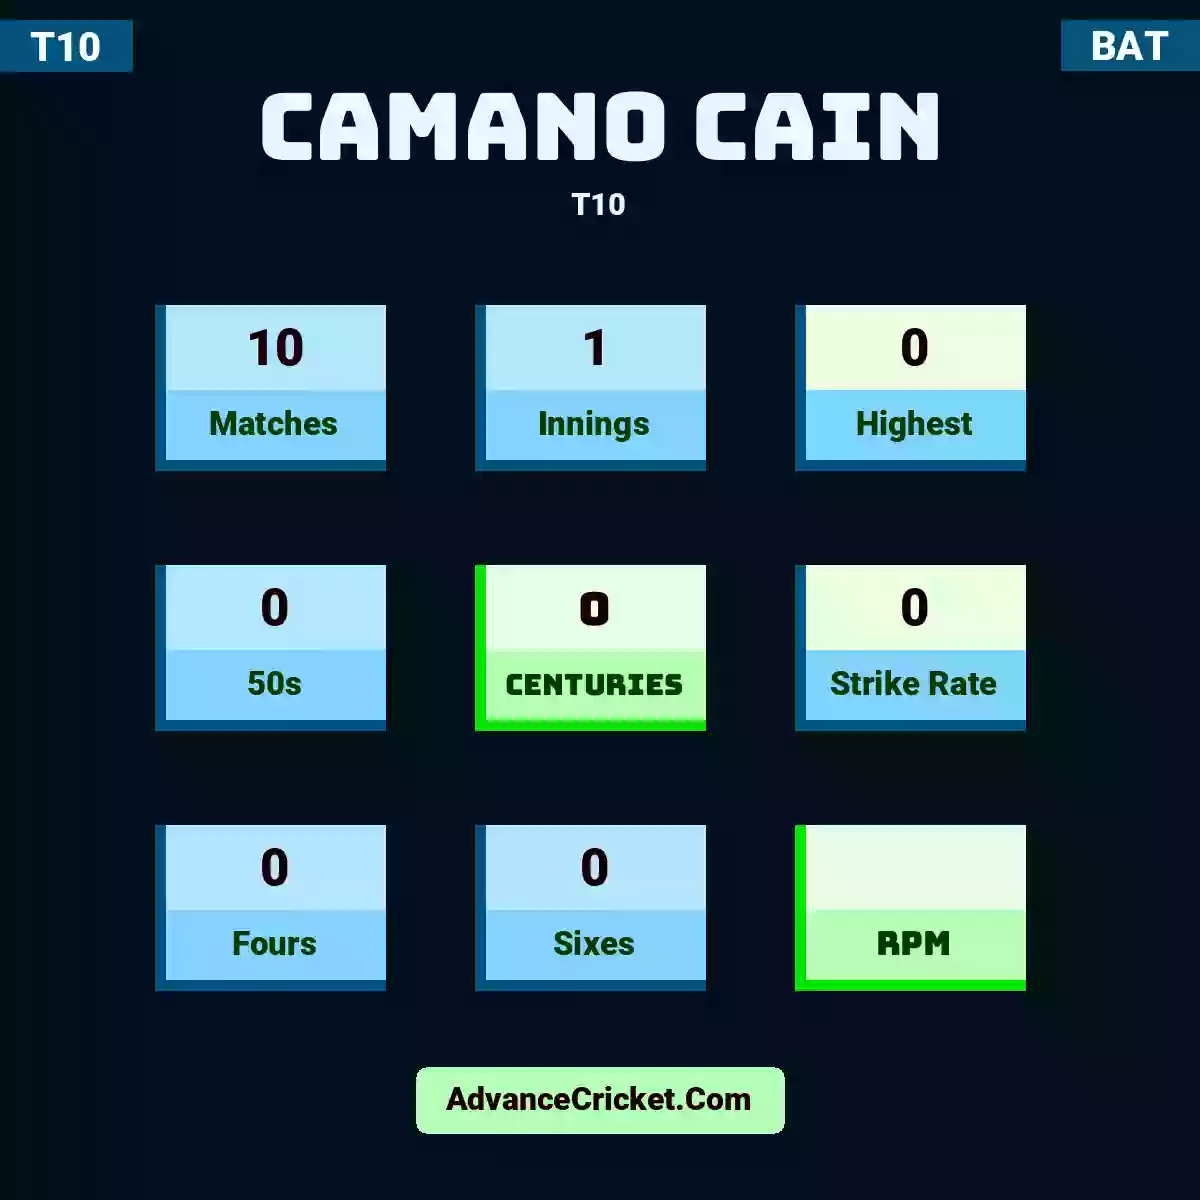 Camano Cain T10 , Camano Cain played 10 matches, scored 0 runs as highest, 0 half-centuries, and 0 centuries, with a strike rate of 0. C.Cain hit 0 fours and 0 sixes.